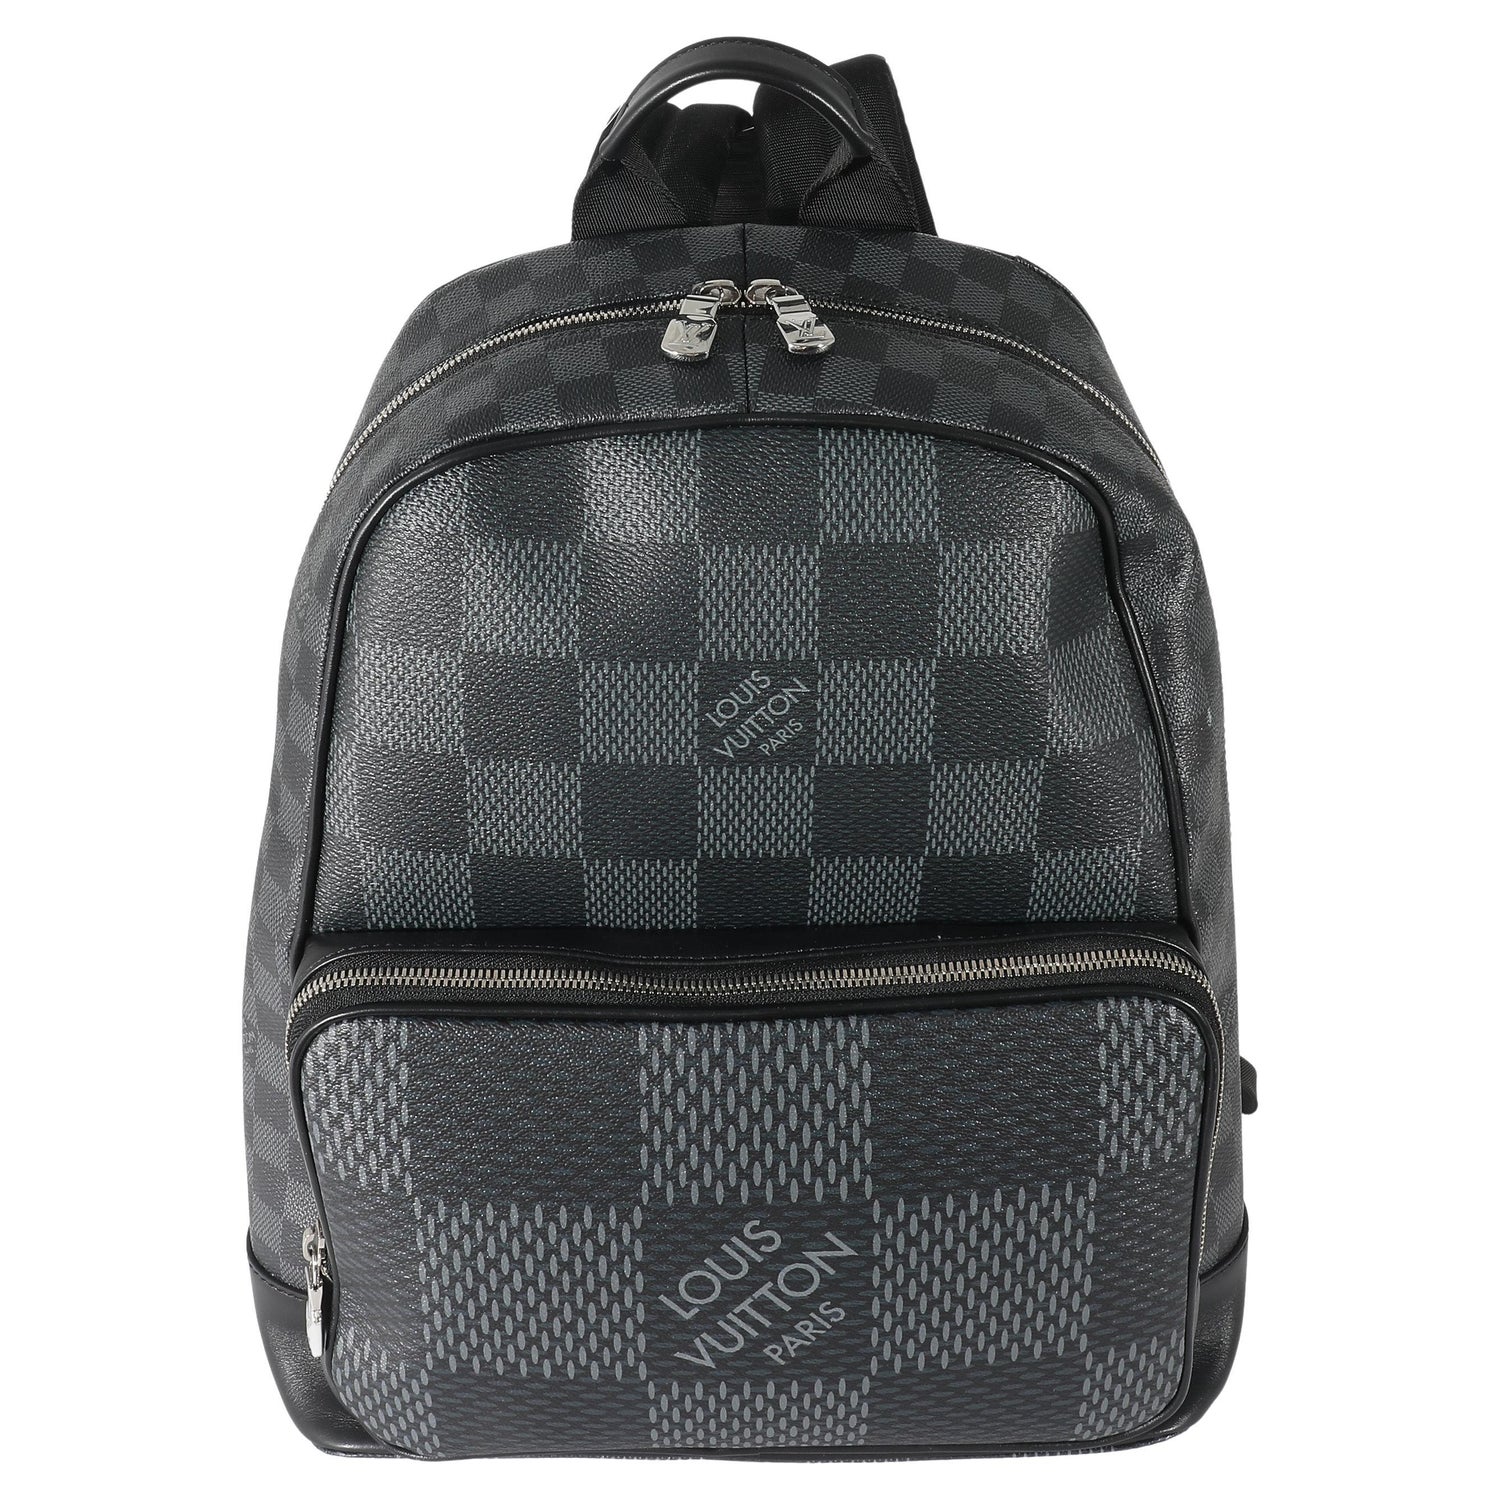 Louis Vuitton Sac a Dos Bosphore Backpack in Monogram Vachette - SOLD